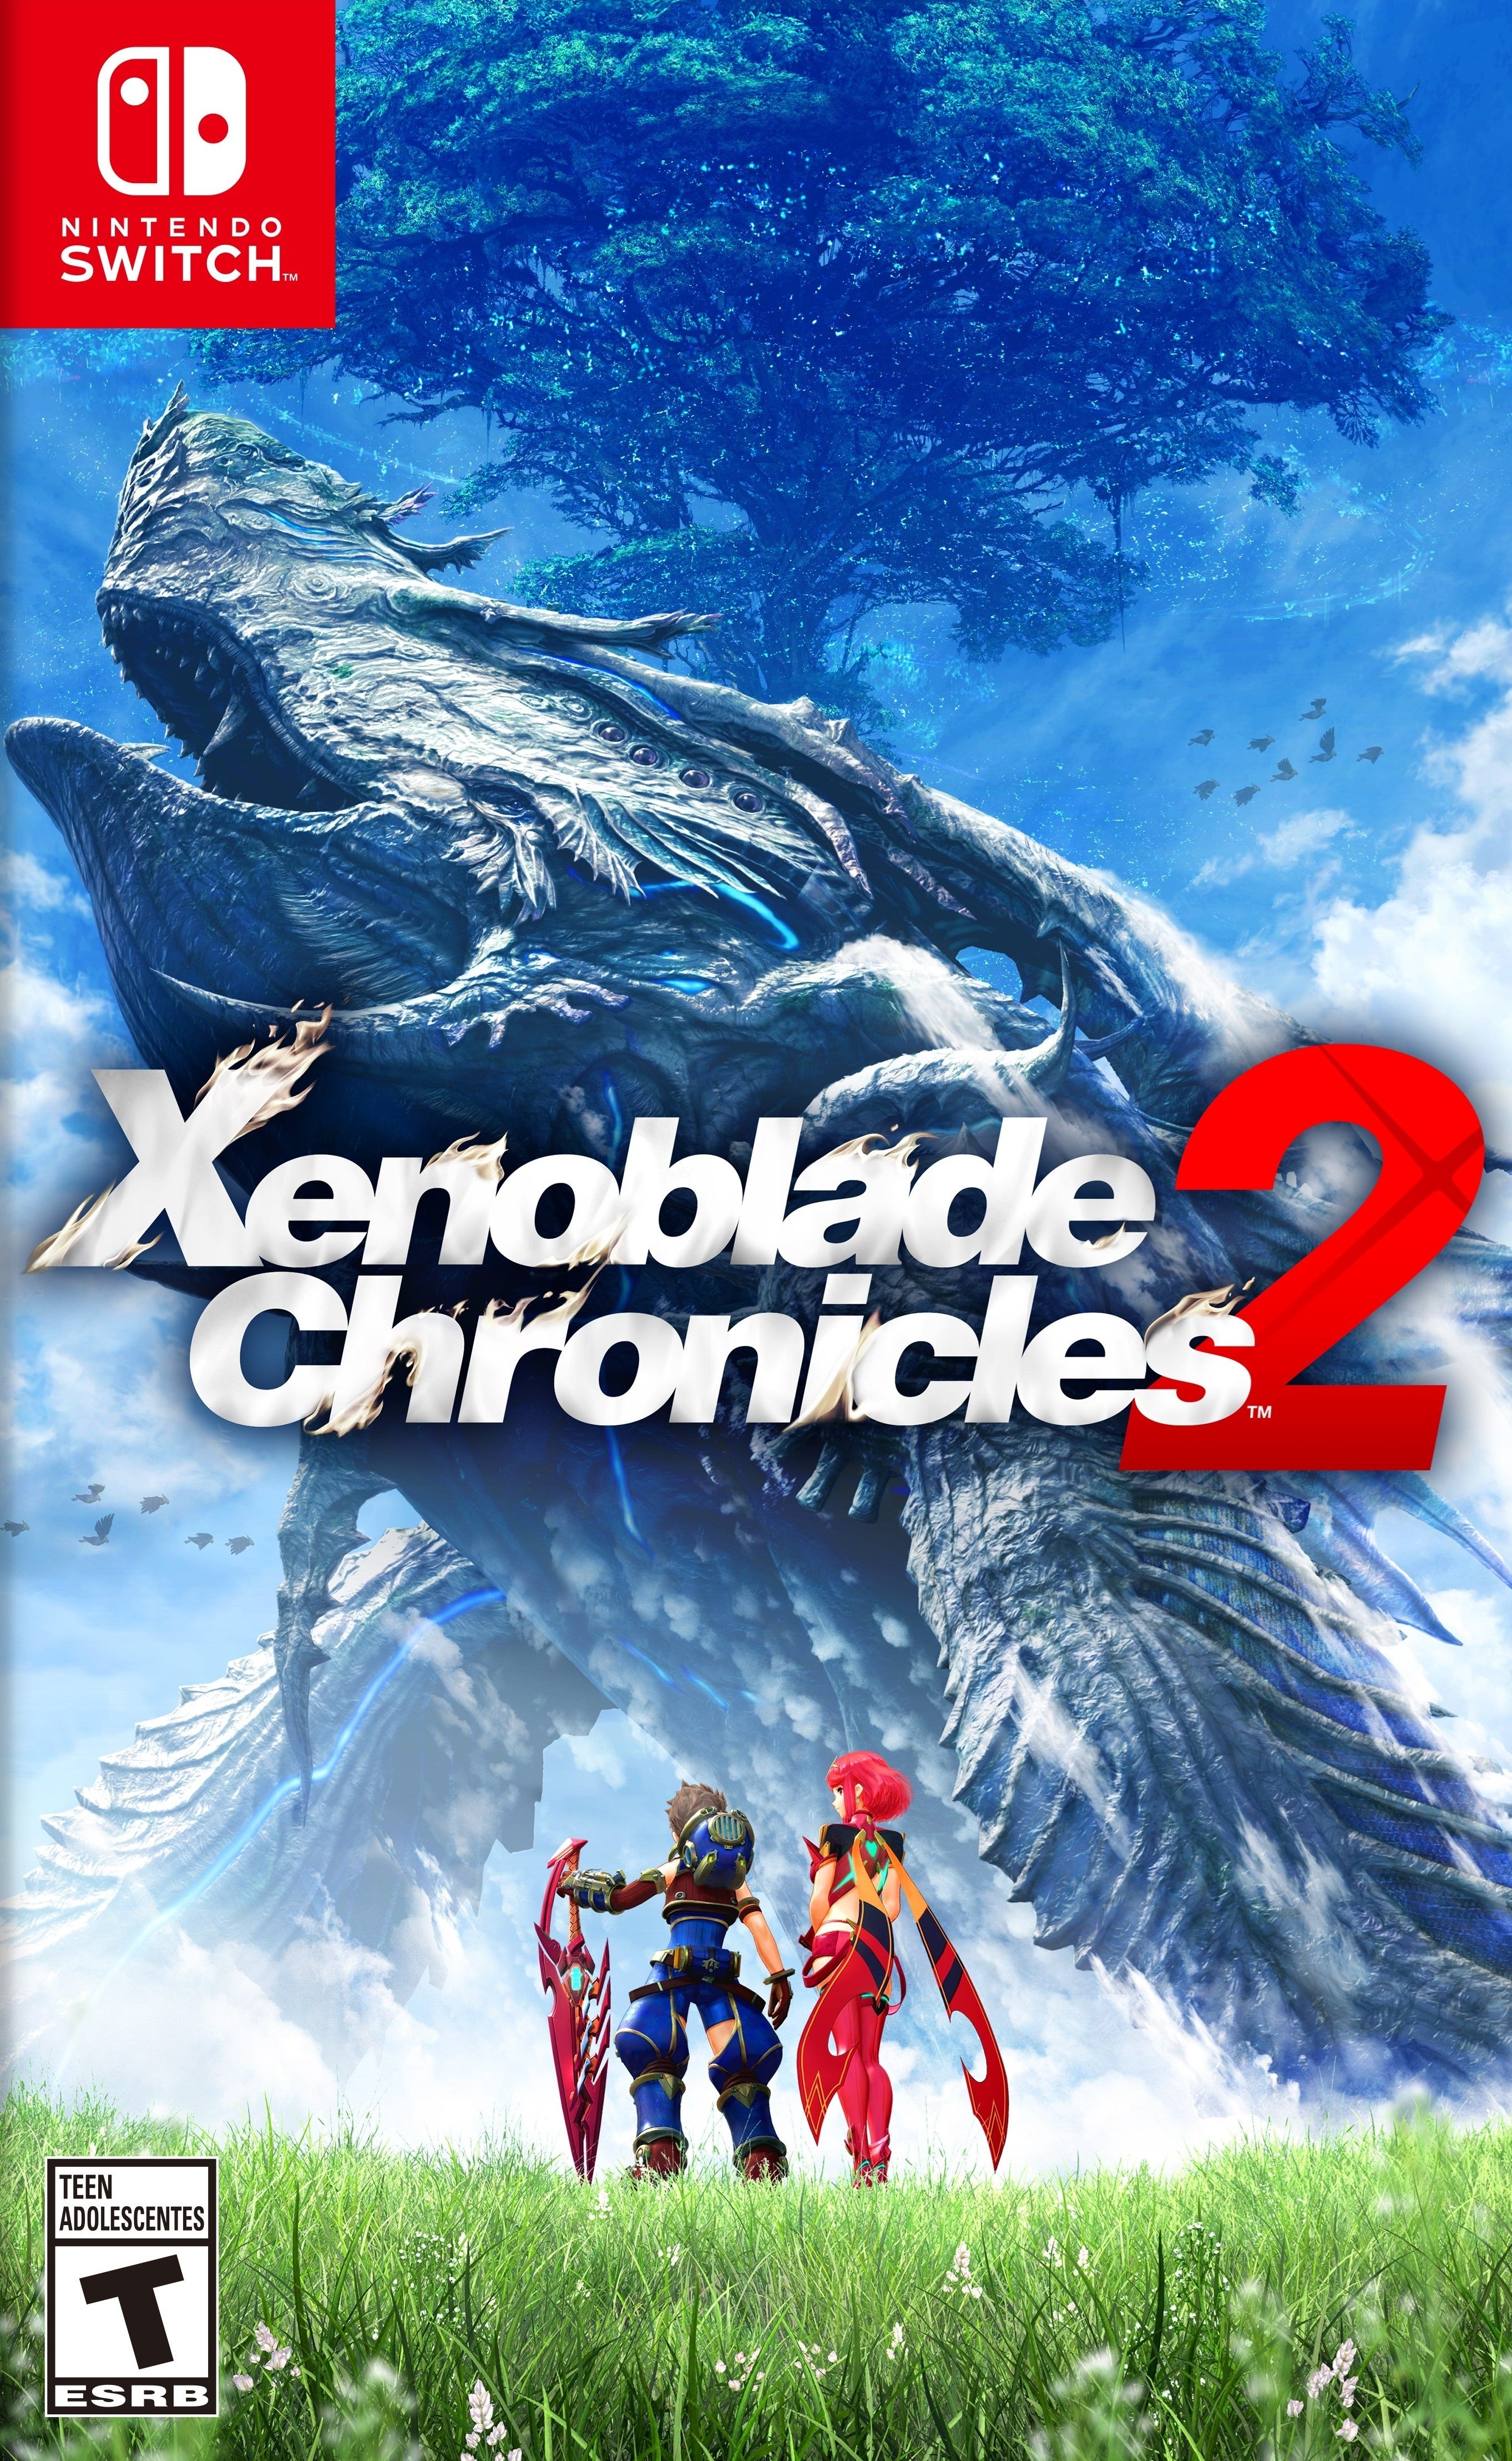 Read some reviews on metacritic about Xenoblade Chronicles 2. :  r/Xenoblade_Chronicles